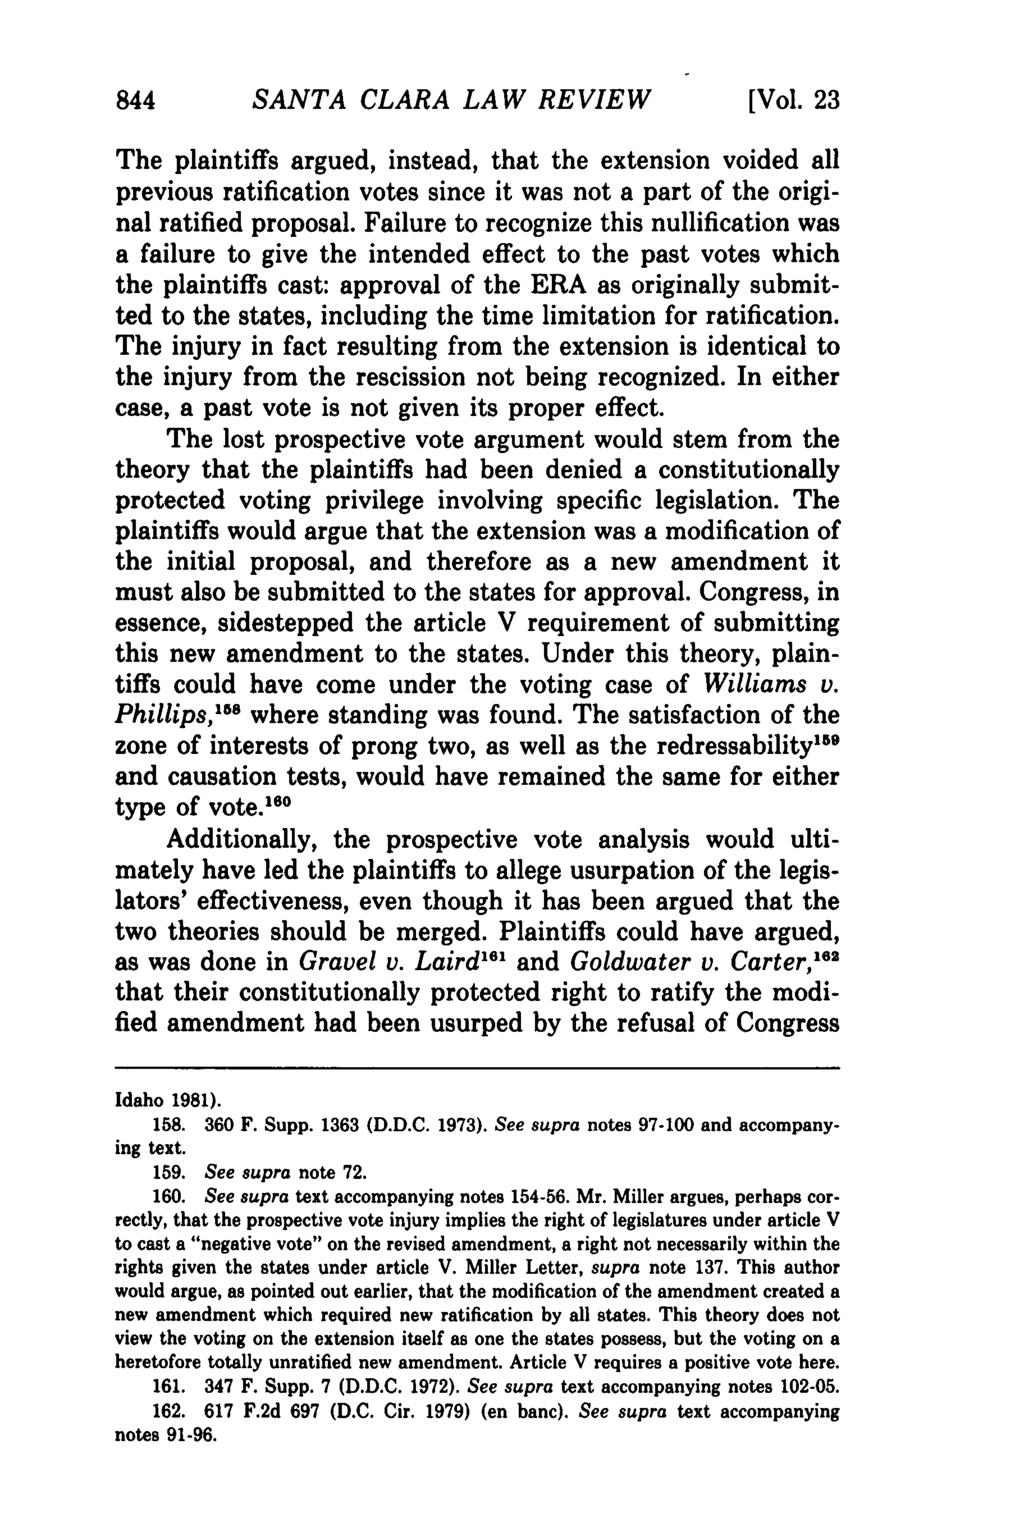 SANTA CLARA LAW REVIEW [Vol. 23 The plaintiffs argued, instead, that the extension voided all previous ratification votes since it was not a part of the original ratified proposal.